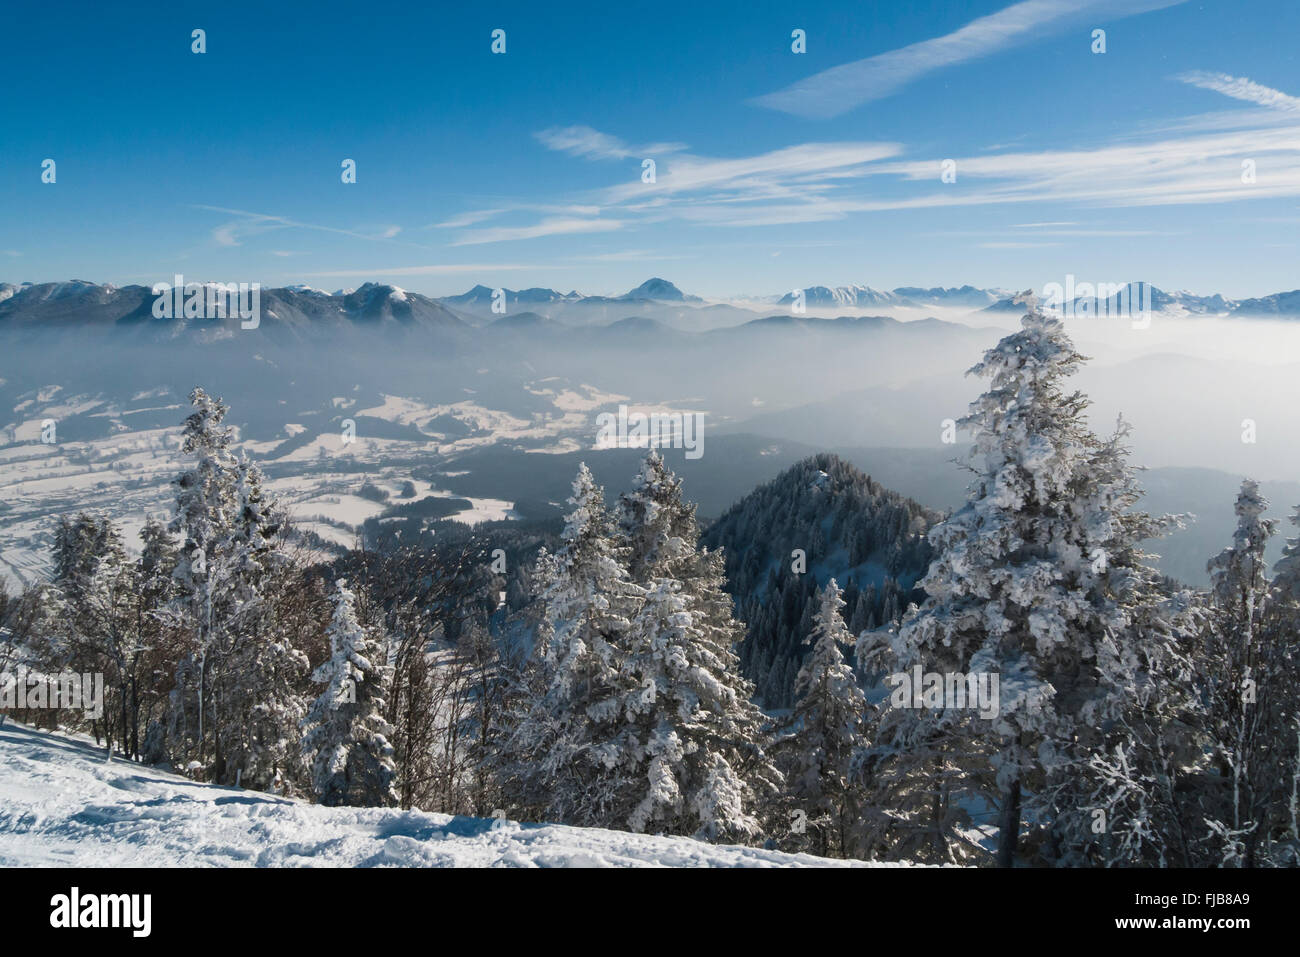 View from the Brauneck ski resort on the alpine panorama of the snow covered mountains, Bavaria, Germany Stock Photo